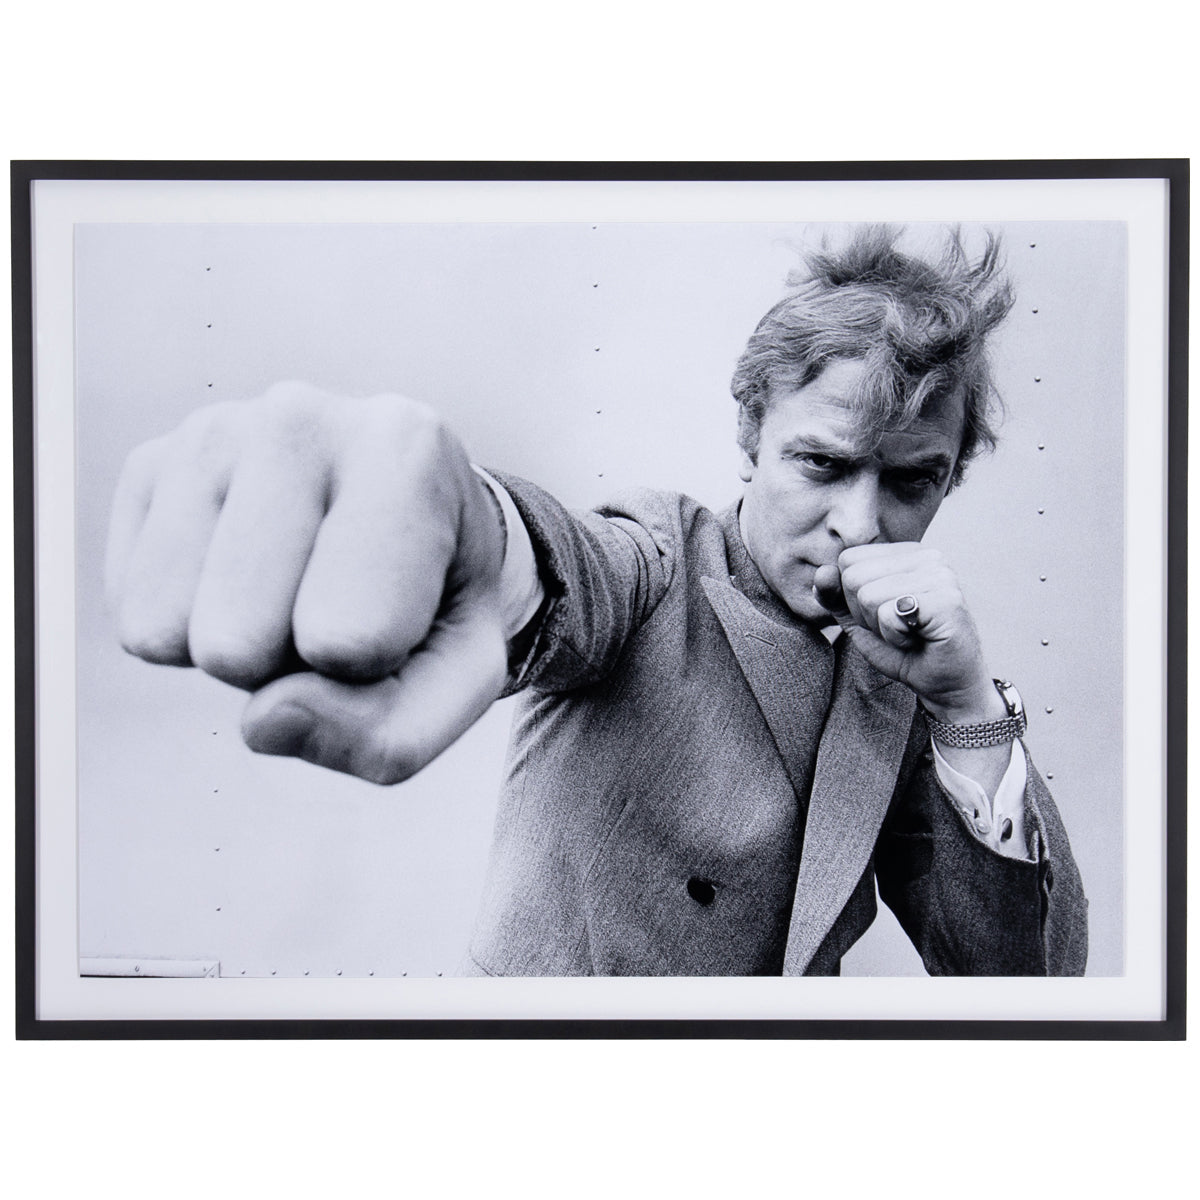 Four Hands Art Studio Michael Caine Punch by Getty Images